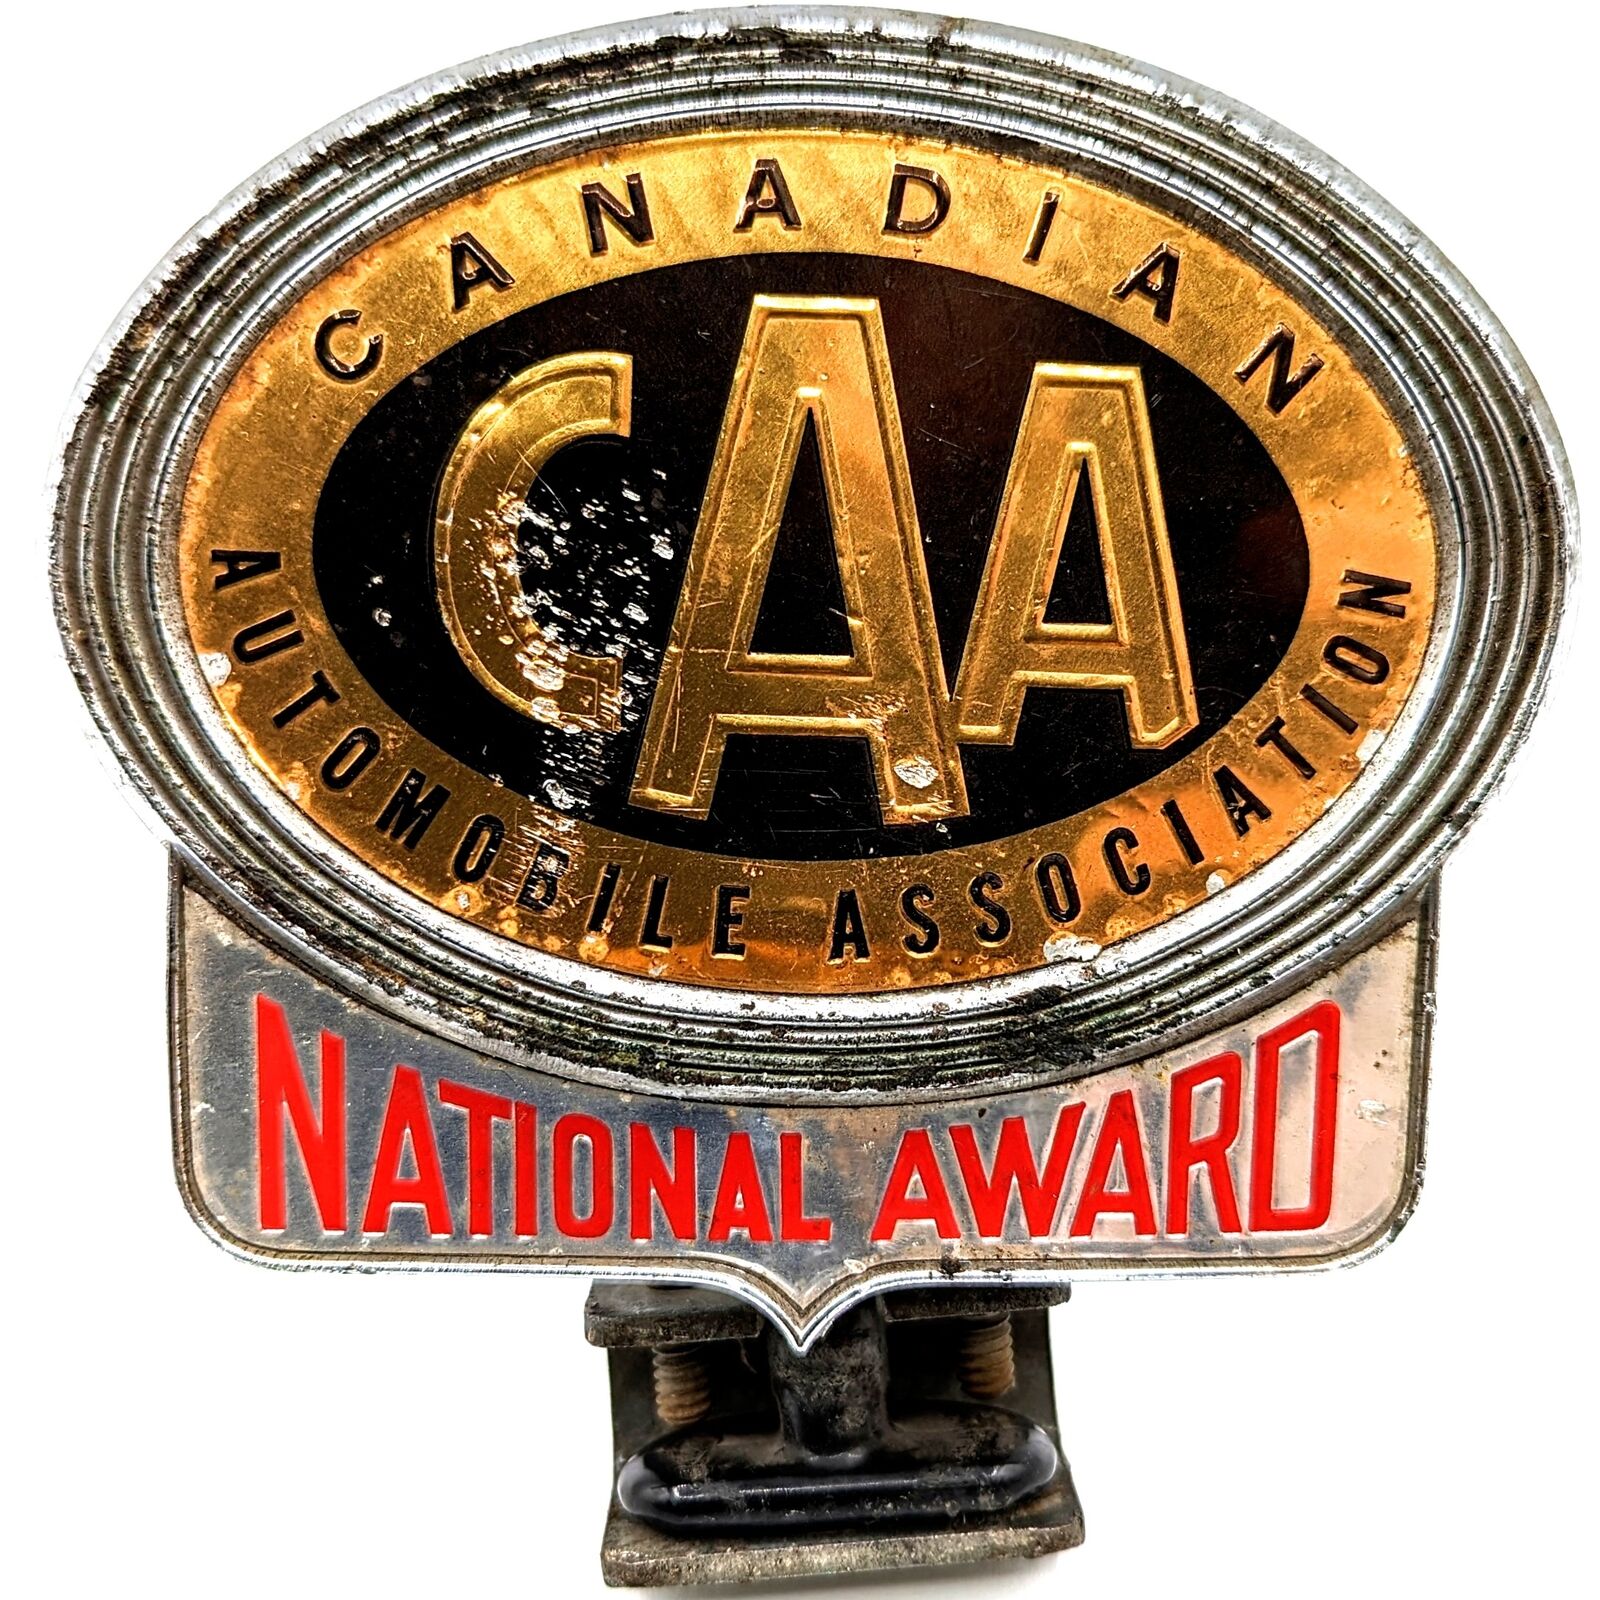 CAA National Award License Plate Topper